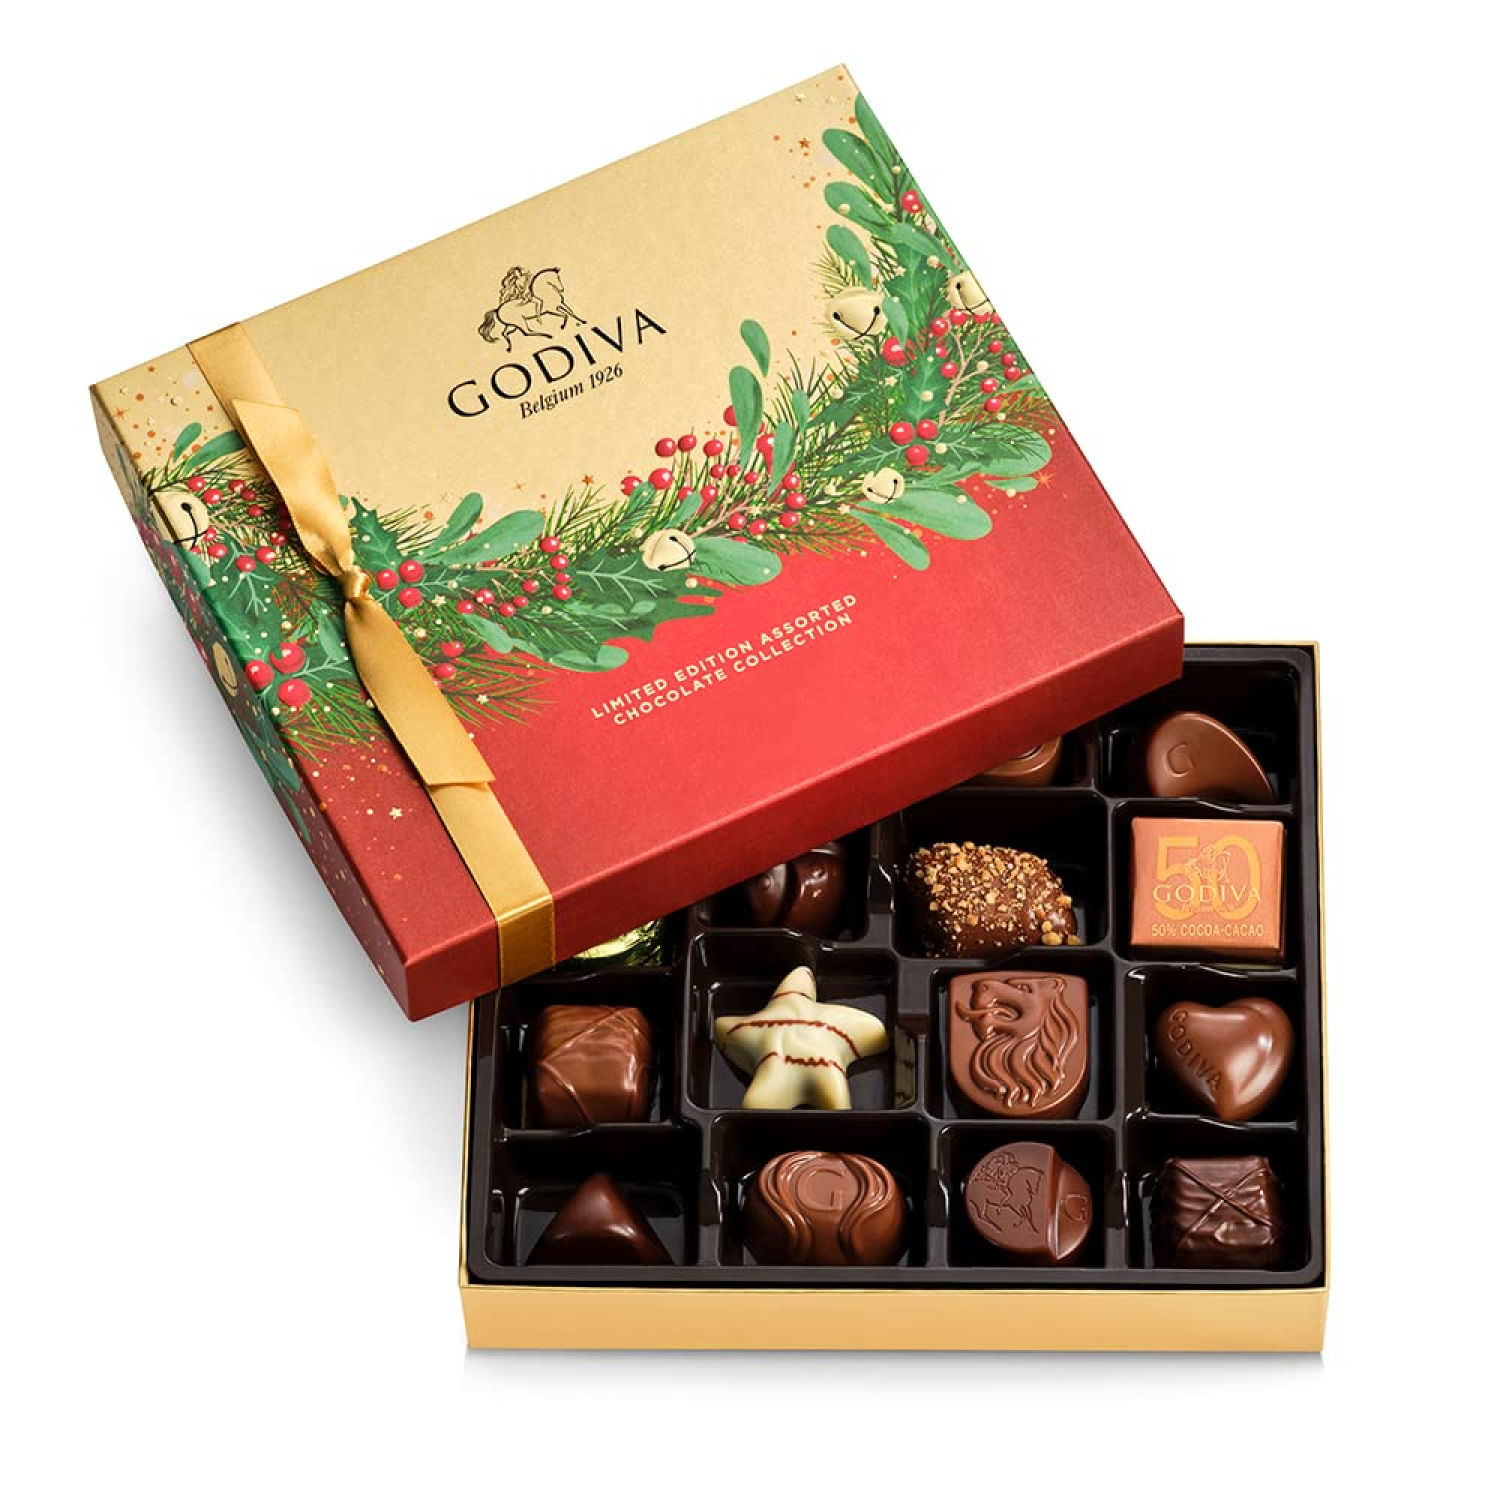 Chocolate GODIVA Limited Edition Assorted Chocolate Holiday Hộp quà tặng